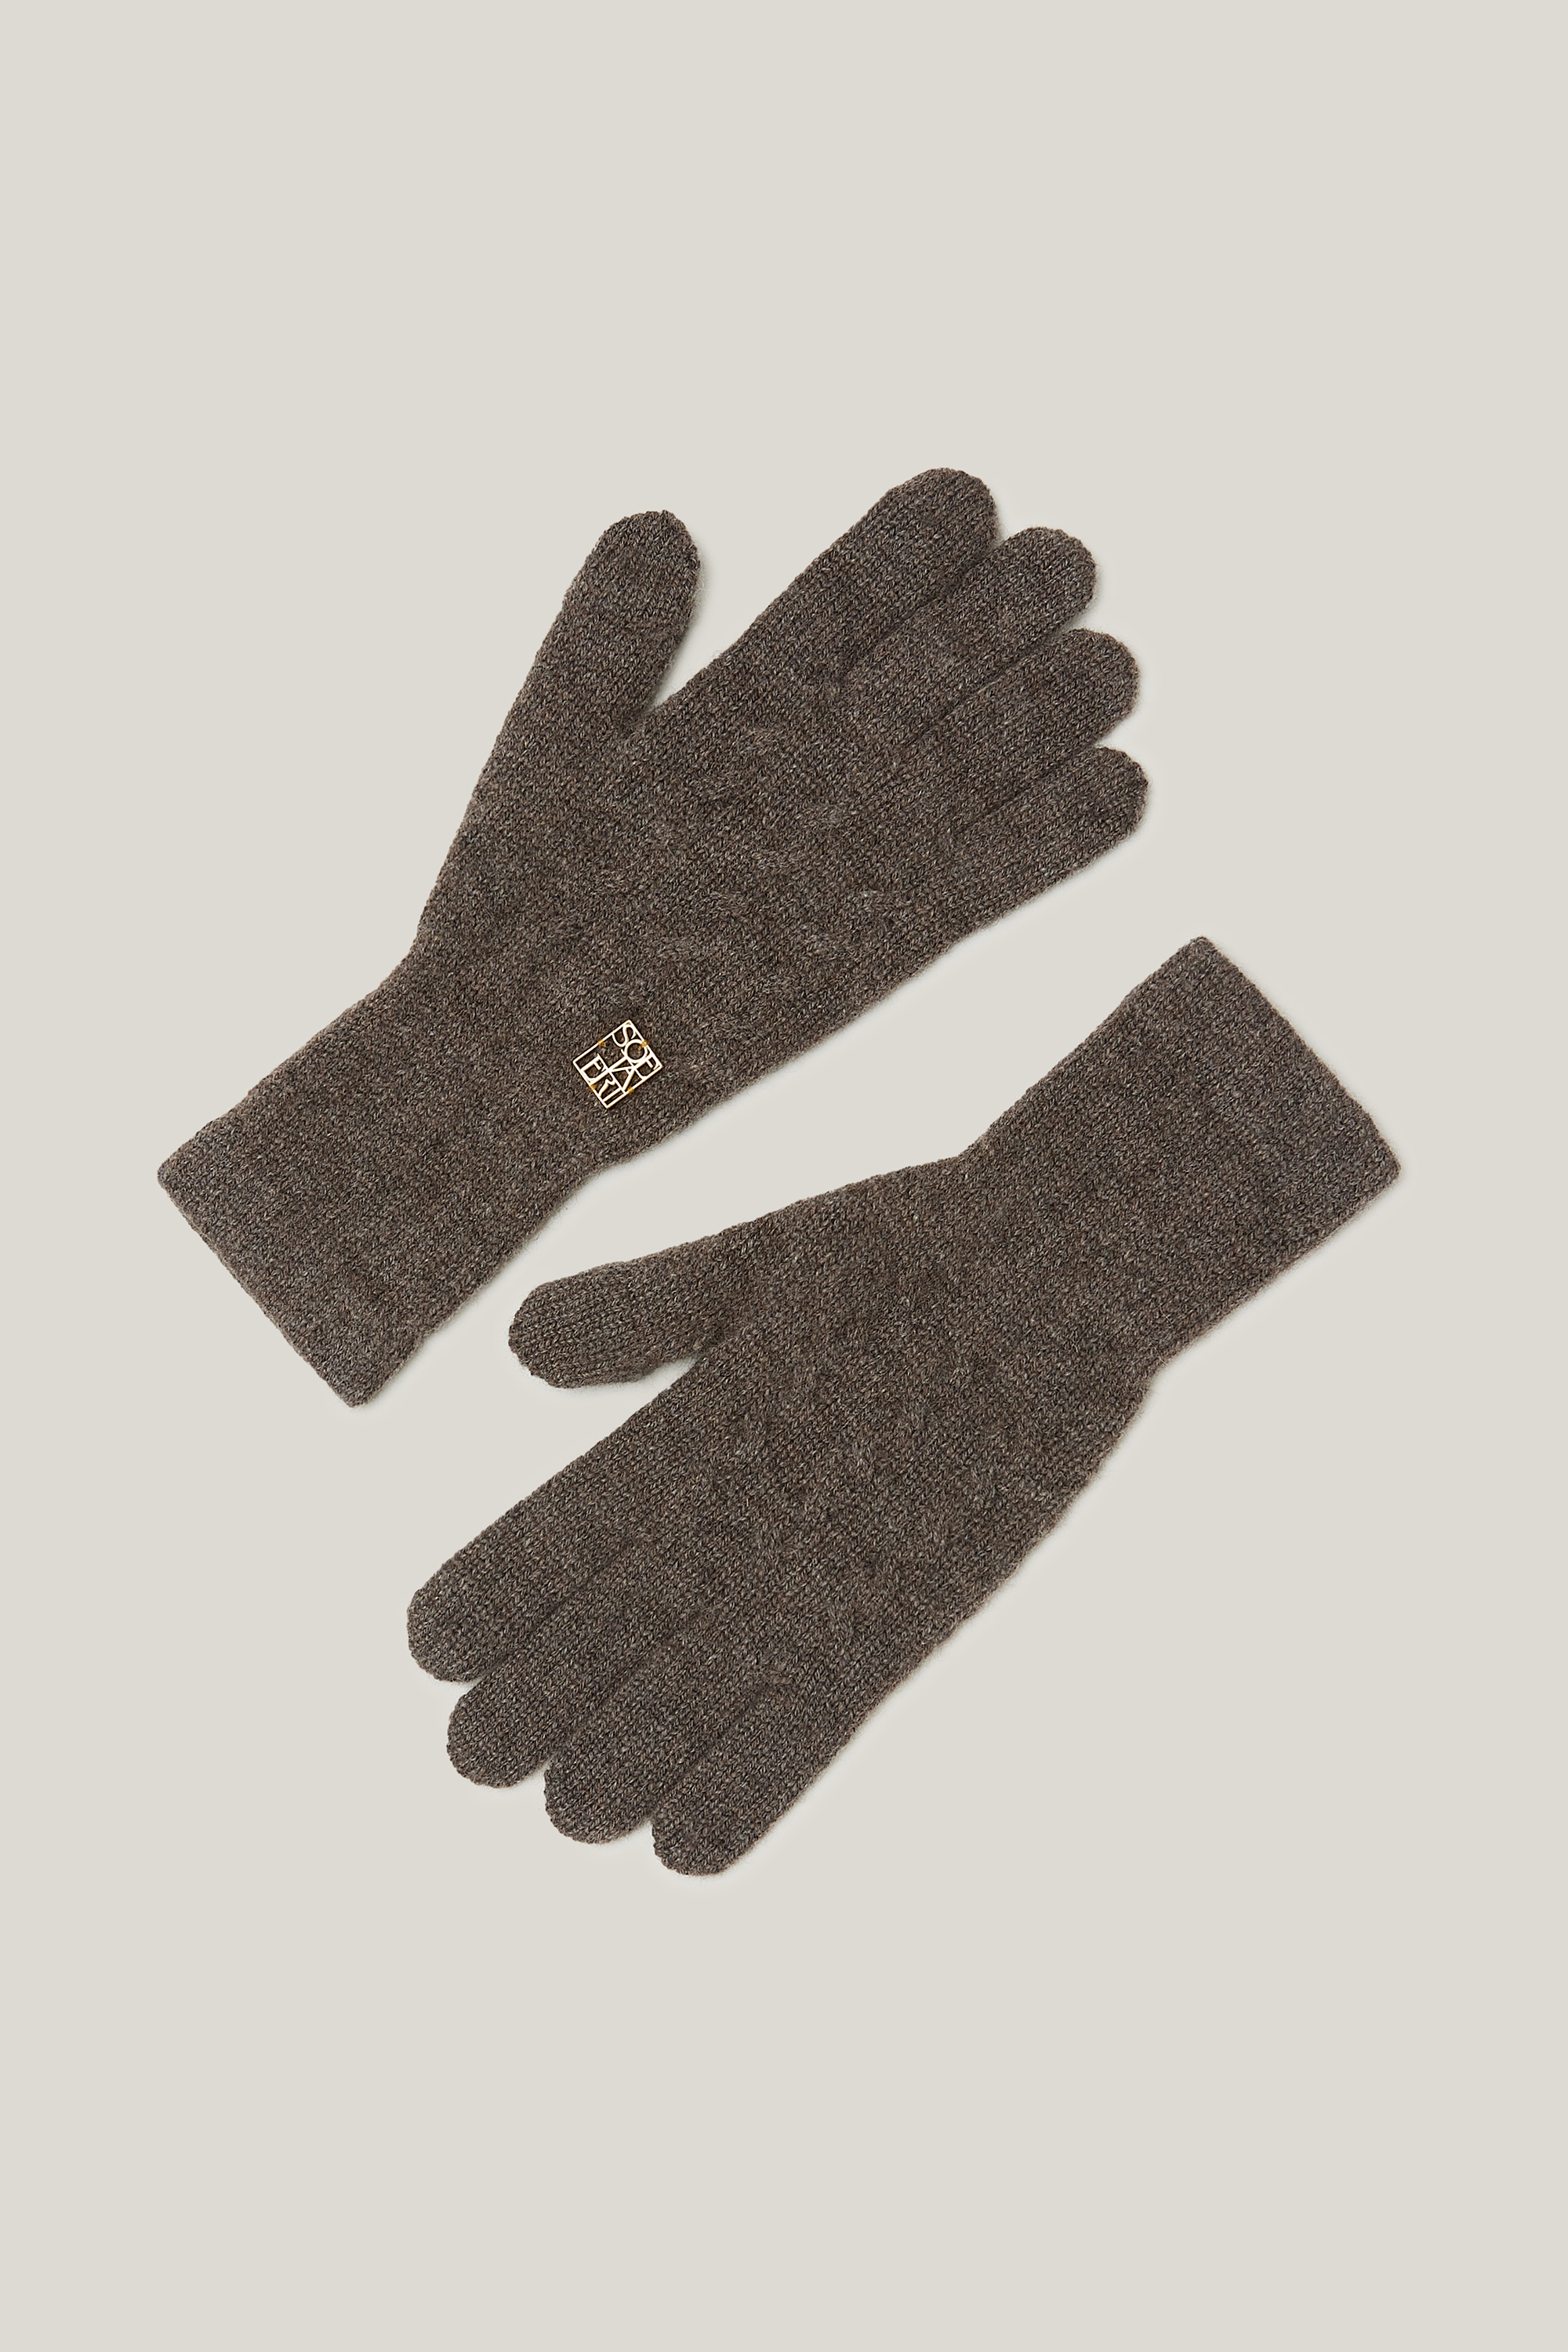 Finger Hole Knit Gloves For Womens (Sepia Brown)